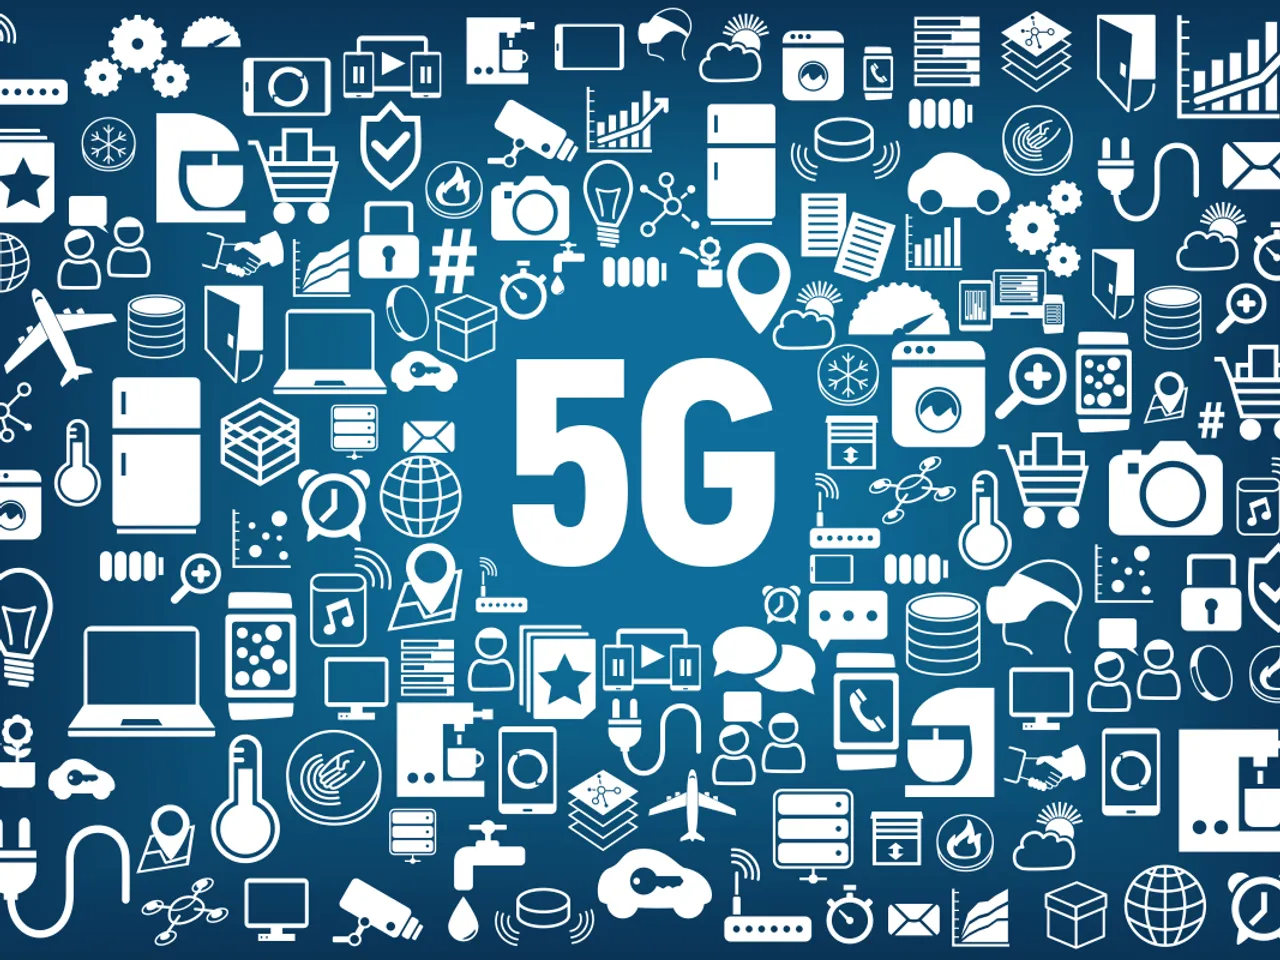 Network slicing is a must for 5G roll-out by telecoms